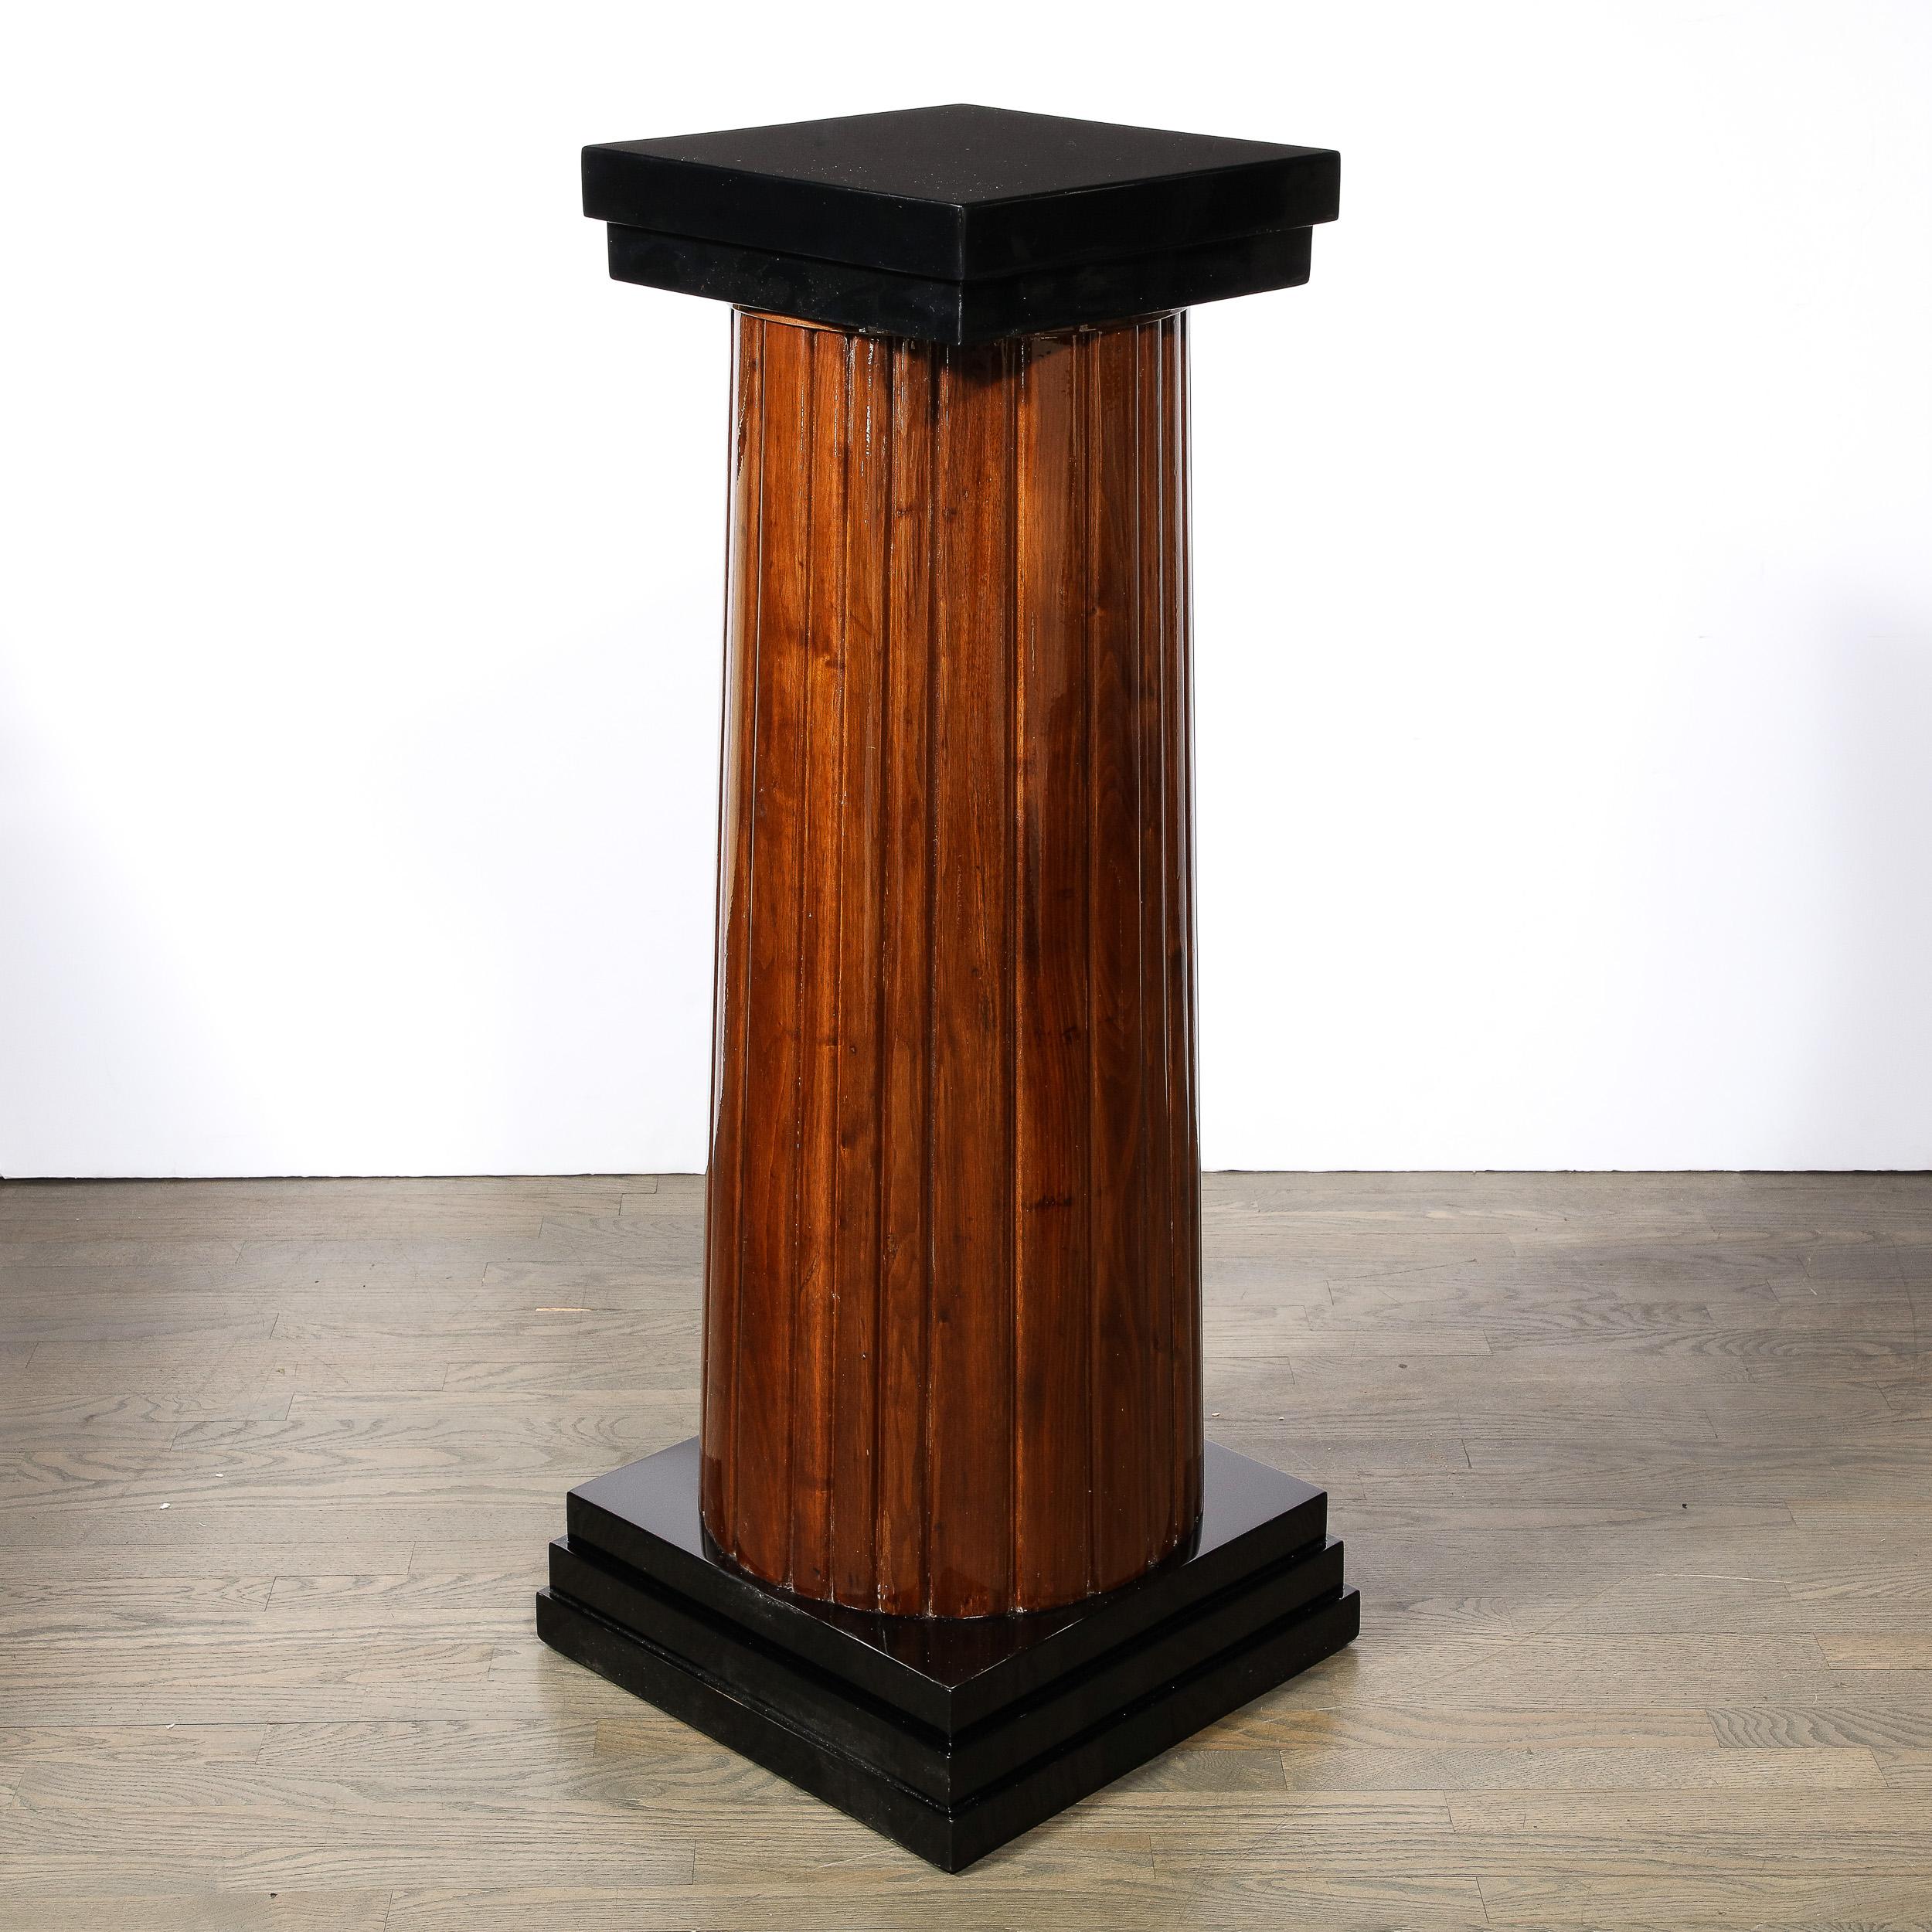 Monumental Art Deco Pedestal with Fluted Detailing in Walnut and Black Lacquer For Sale 6